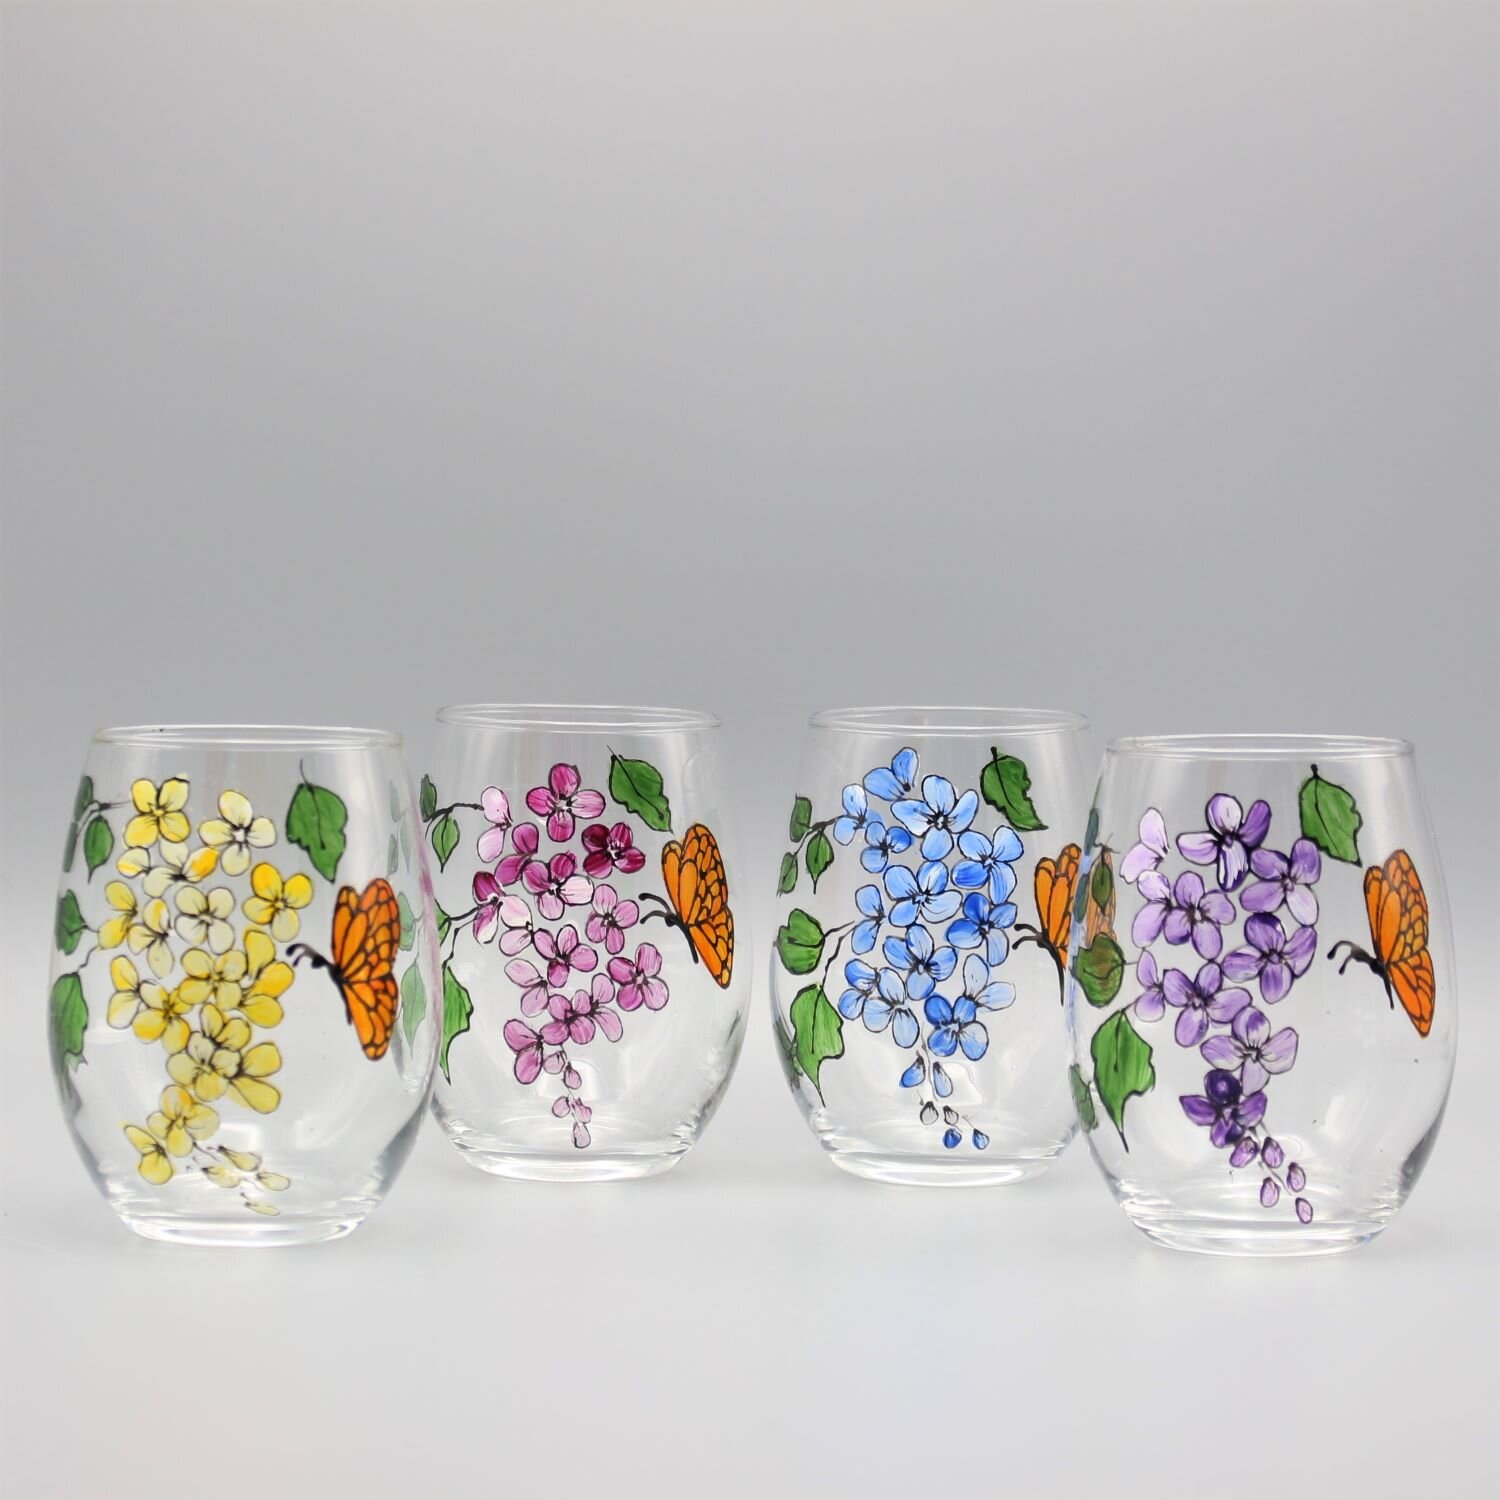 http://images.squarespace-cdn.com/content/v1/5570dc78e4b0bbe8e5cab3d0/1584549328796-IYB1TA1DY3XW6Y84XQQS/butterfly_and_flower_stemless_wine_glasses.JPG